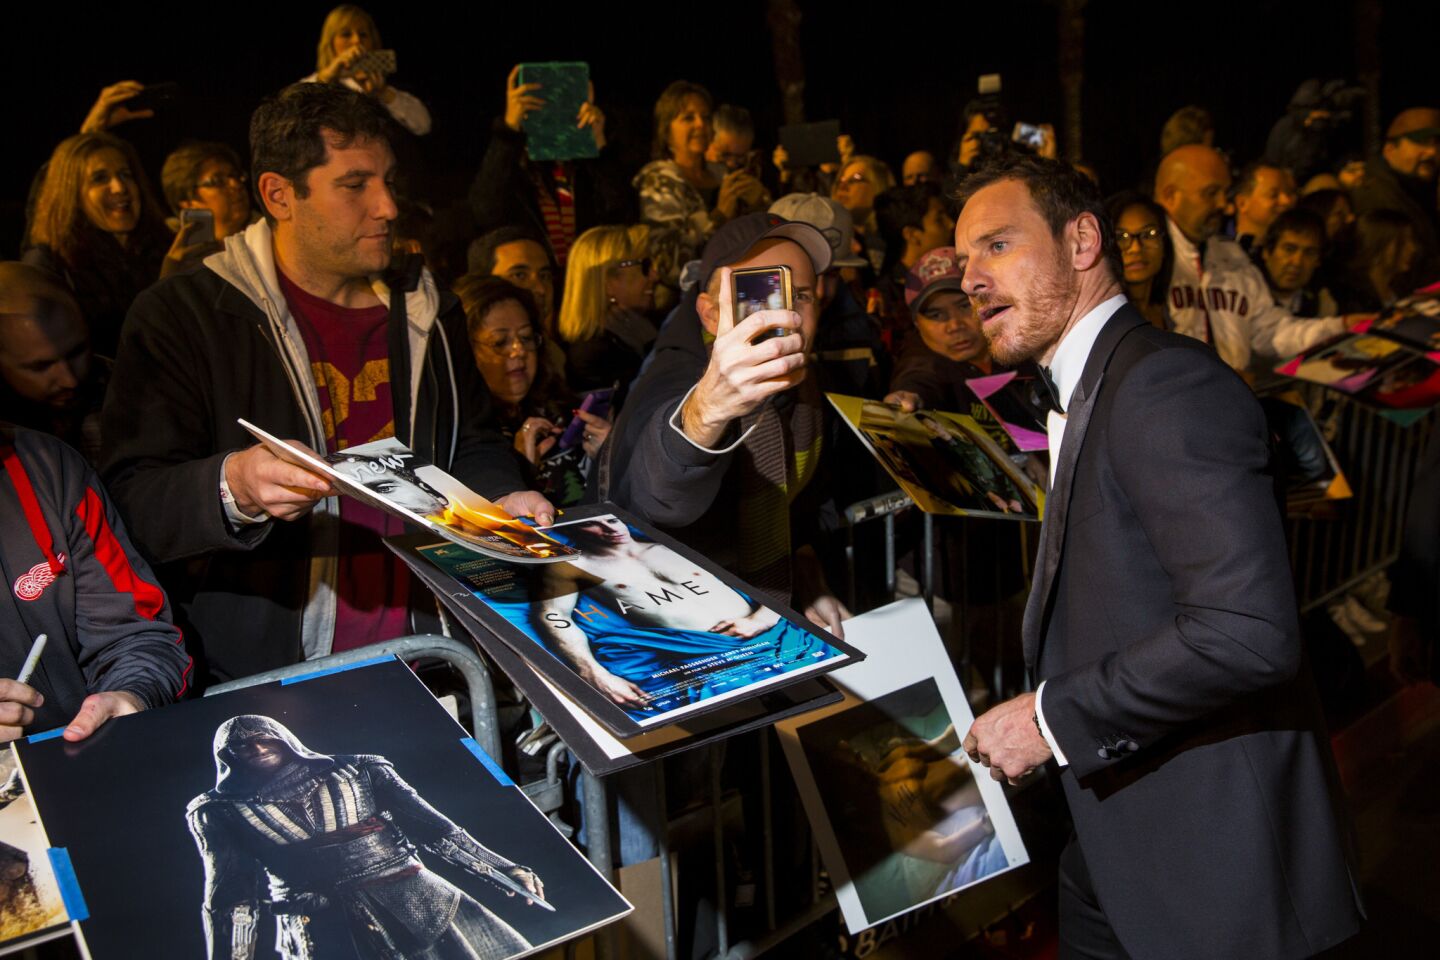 "Steve Jobs" actor Michael Fassbender signs autographs and takes selfies.